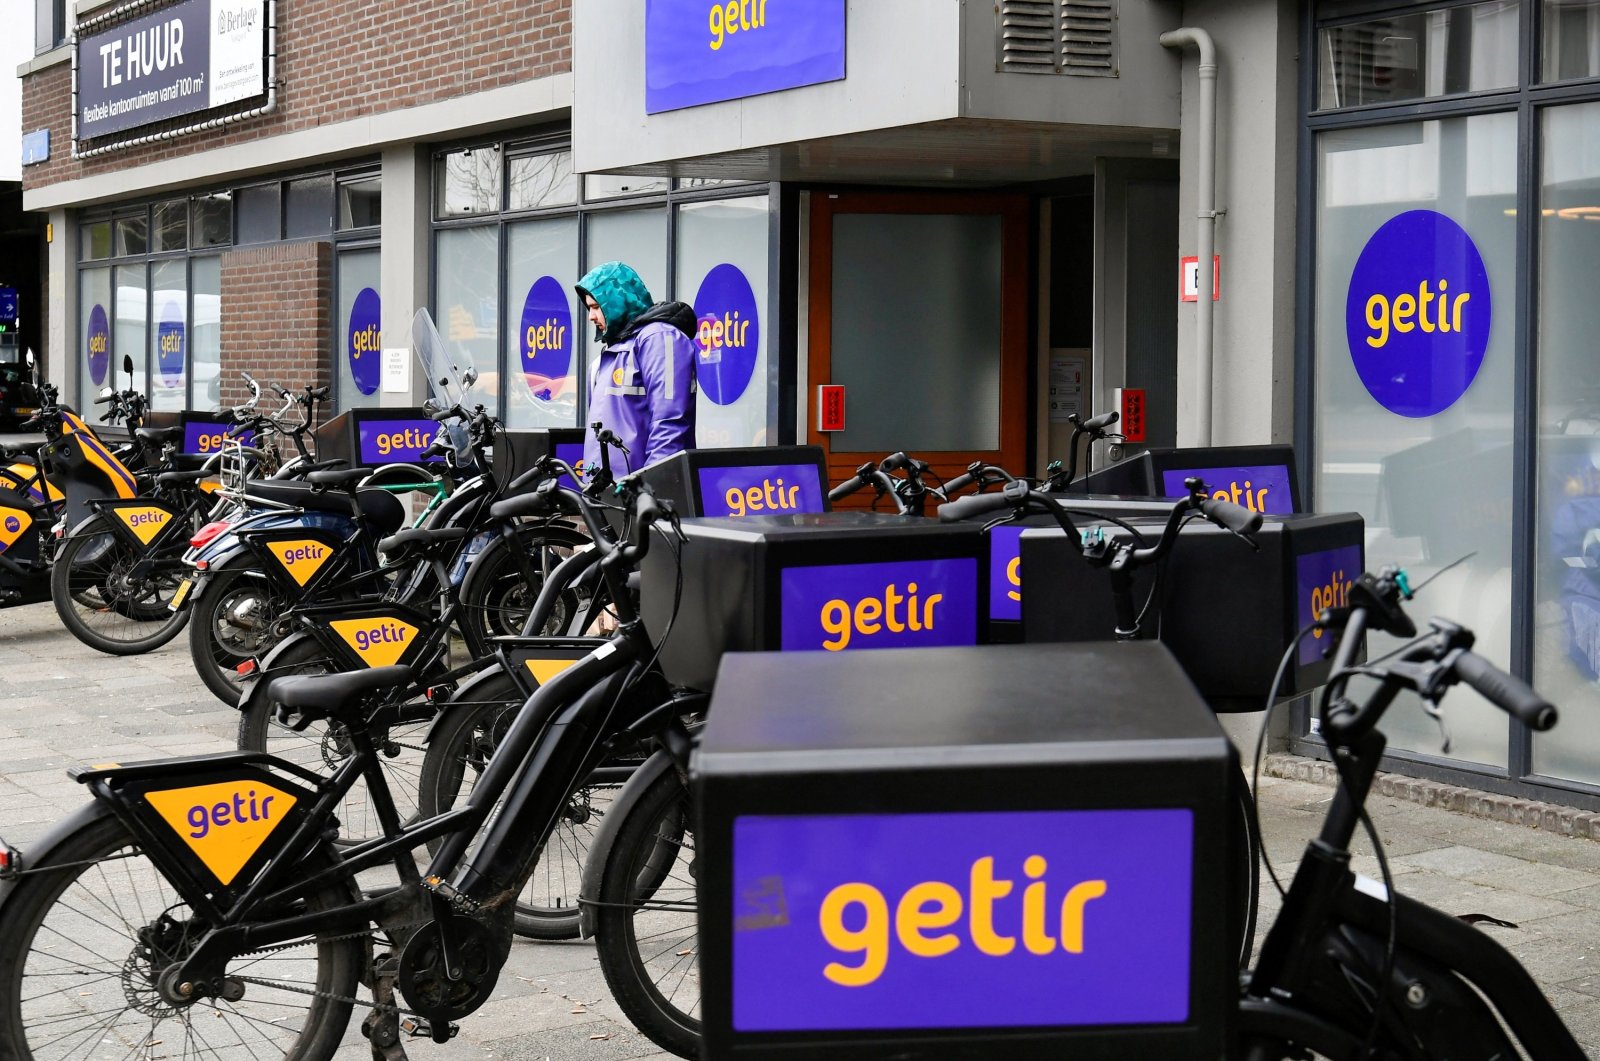 Bikes are parked outside a store of the fast grocery deliverer Getir in Rotterdam, Netherlands, Feb. 8, 2022. (Reuters Photo)